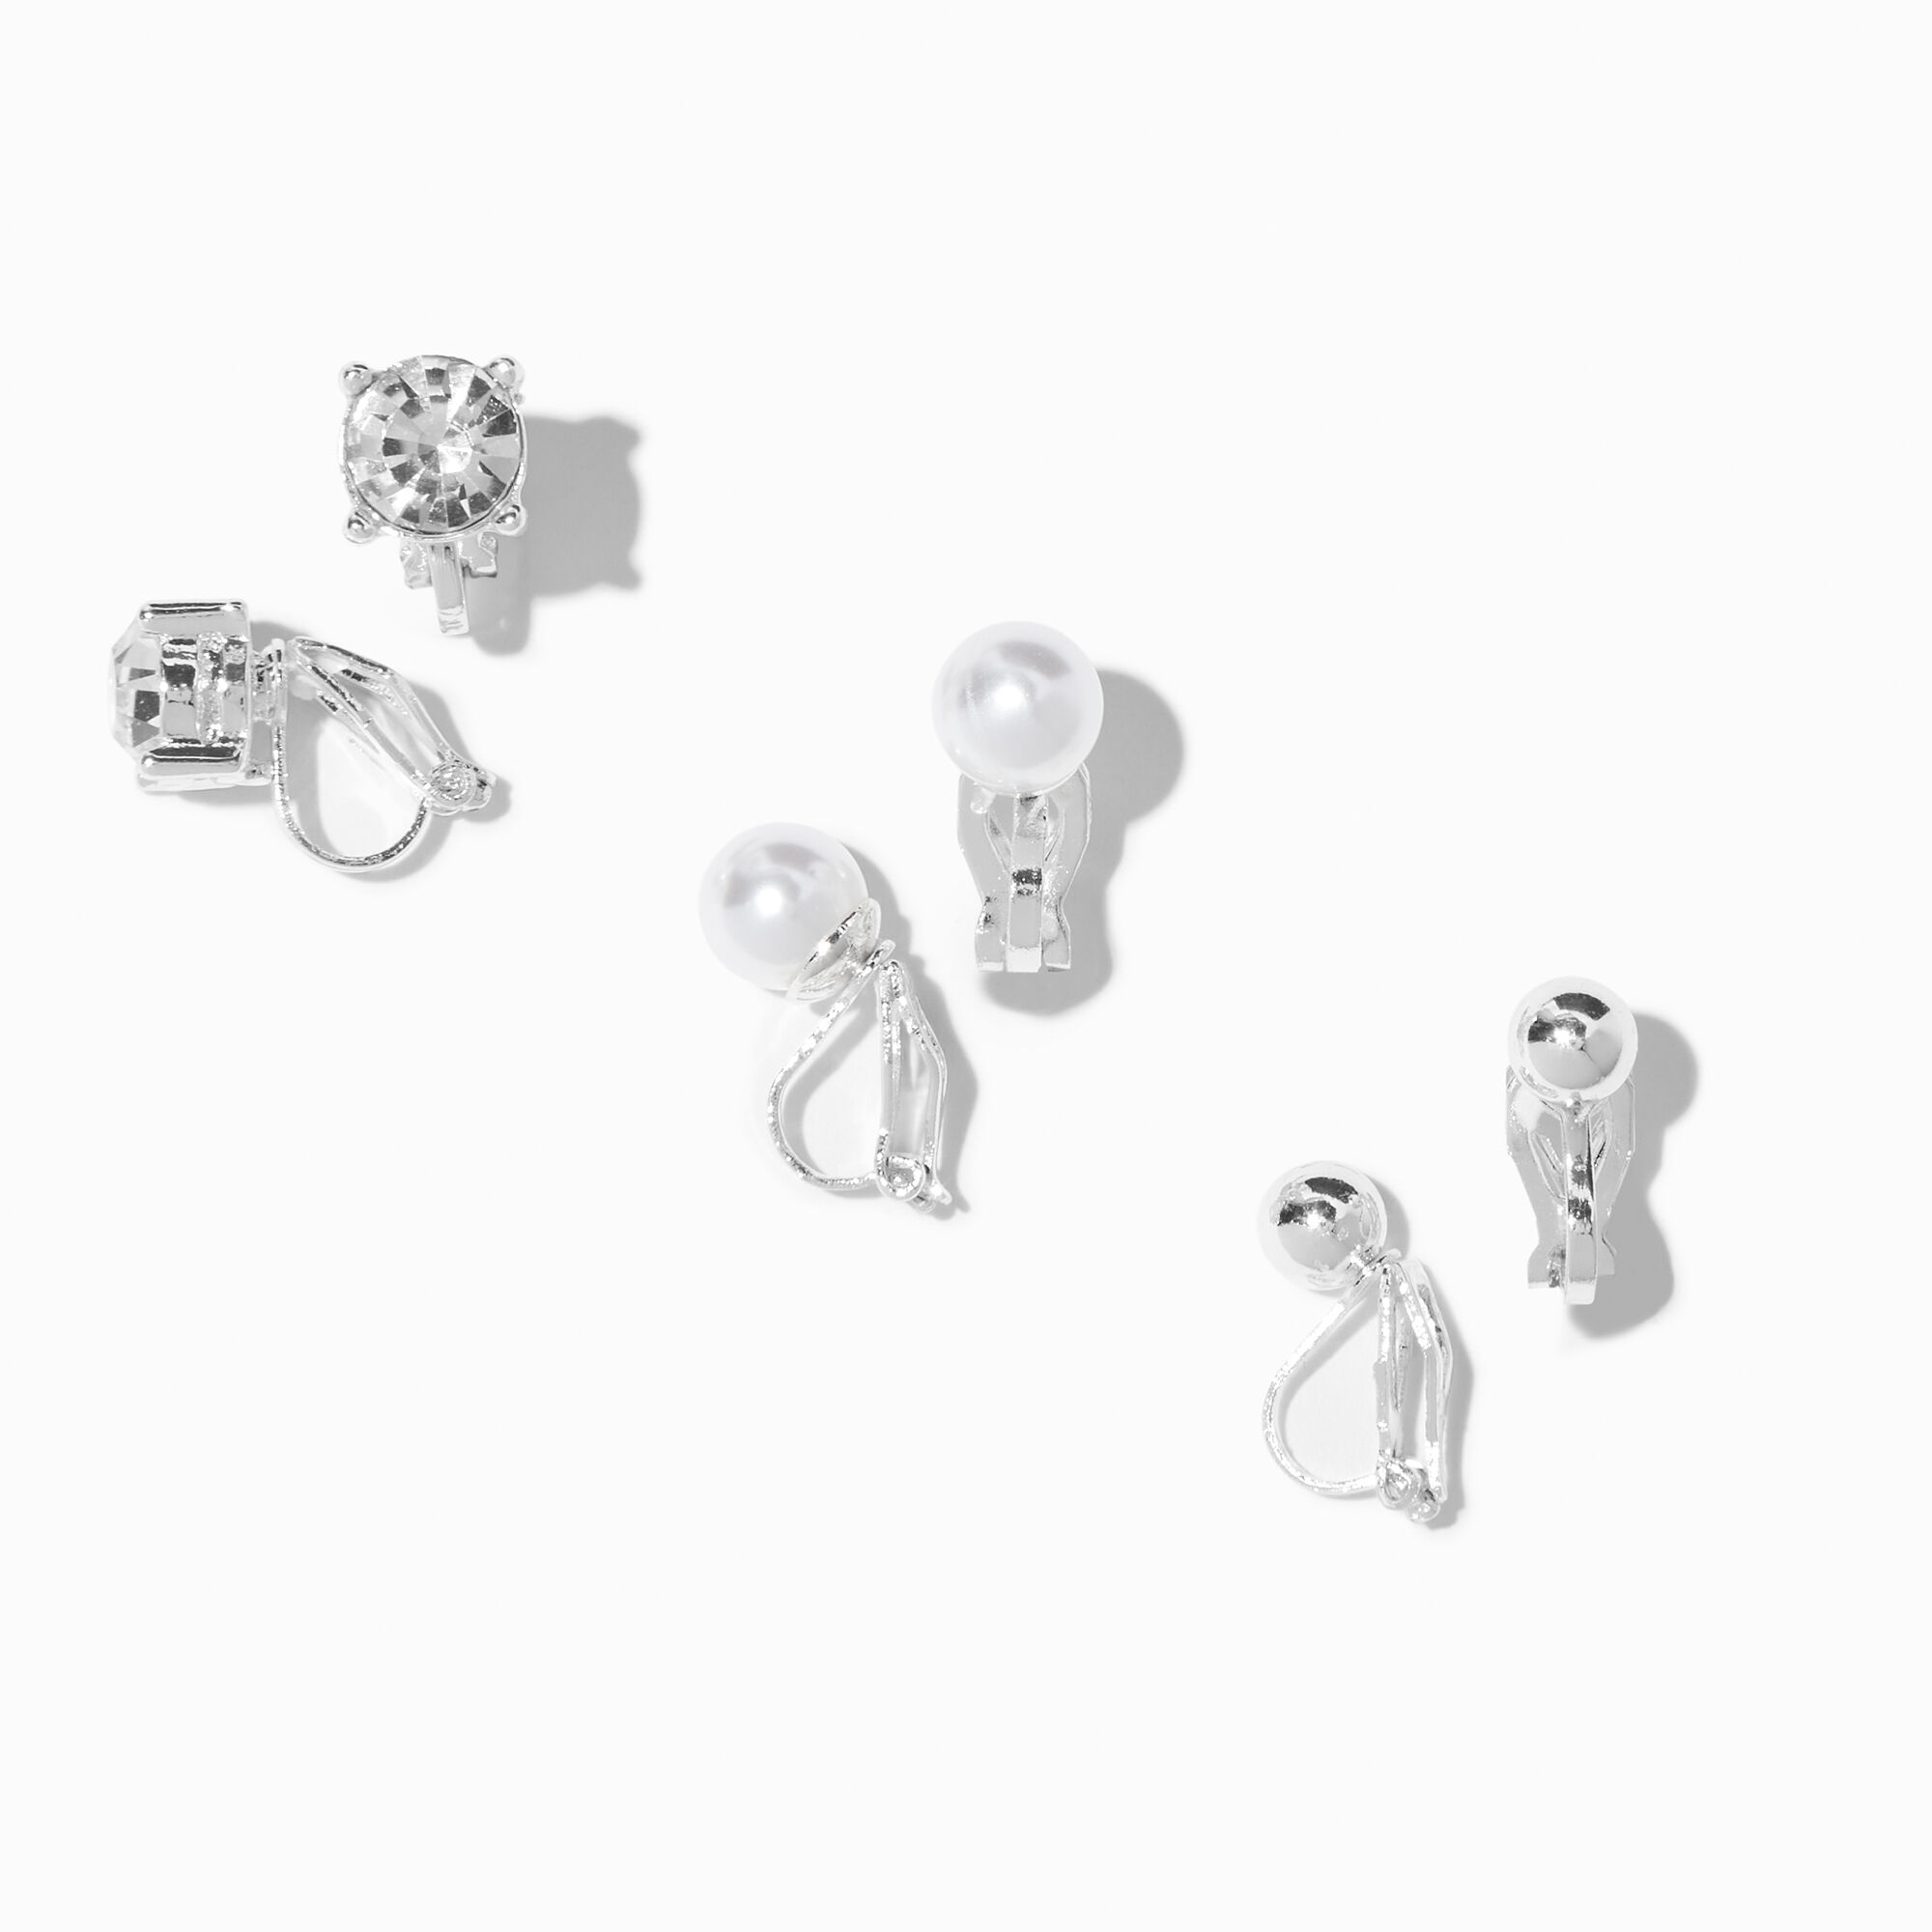 View Claires Tone Crystal Pearl Clip On Stud Earrings 3 Pack Silver information